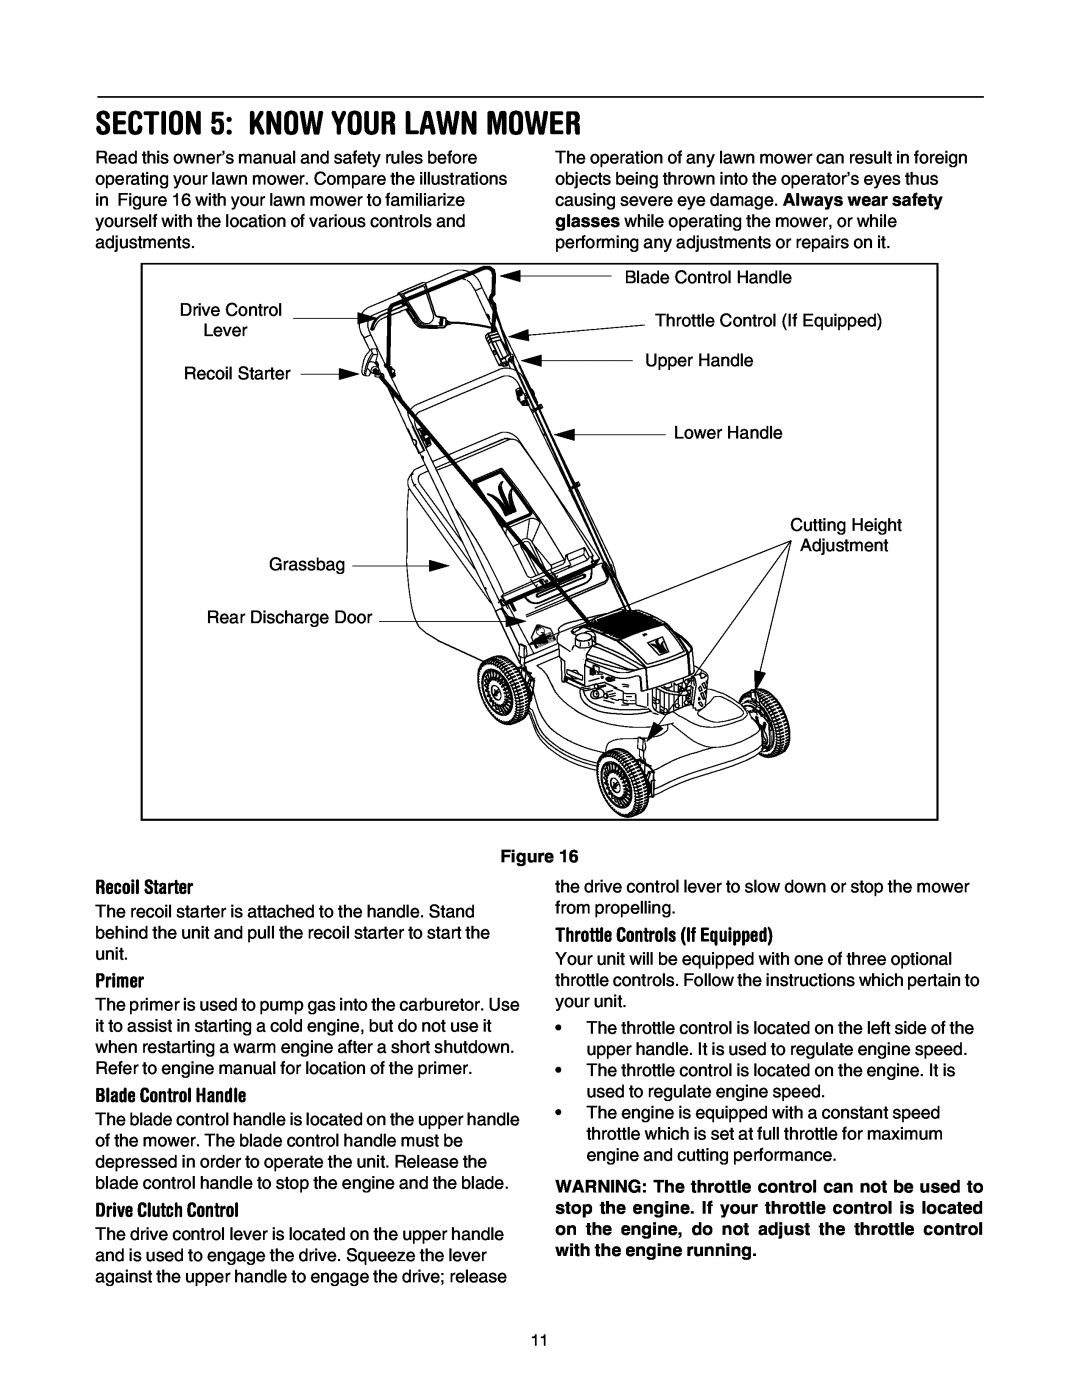 MTD 440 Thru E459 manual Know Your Lawn Mower, Recoil Starter, Primer, Blade Control Handle, Drive Clutch Control 